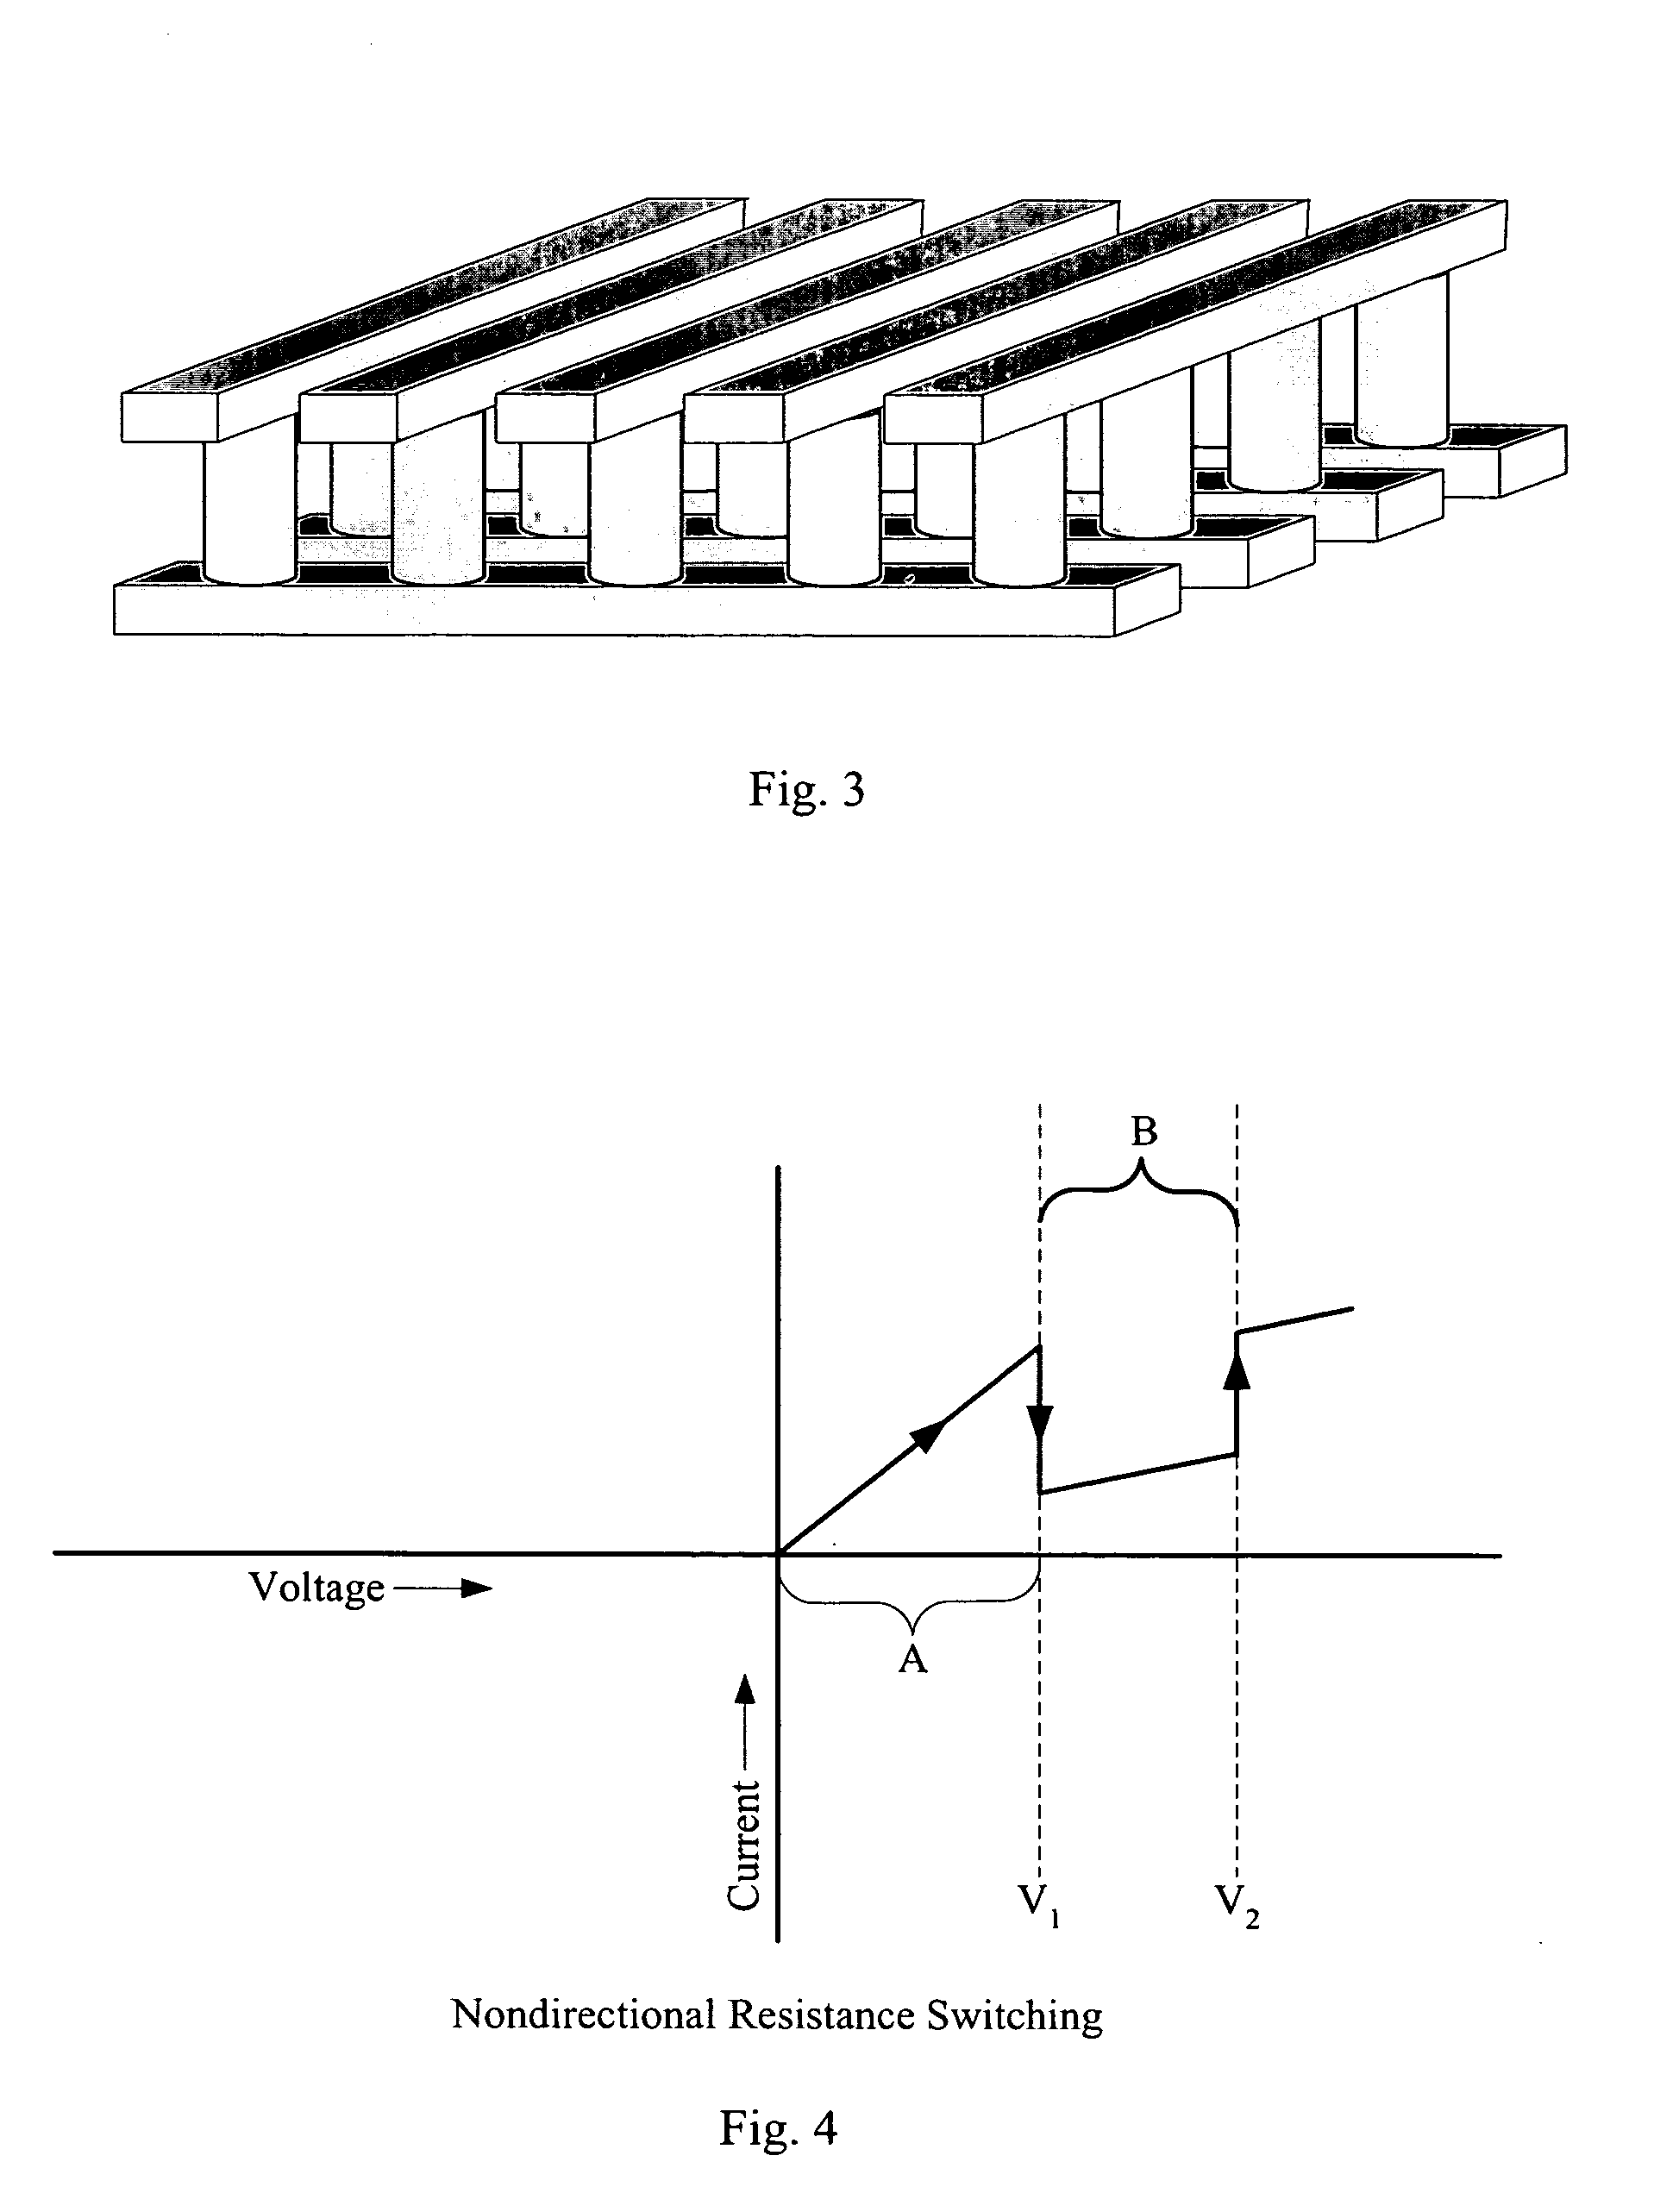 Rewriteable memory cell comprising a diode and a resistance-switching material